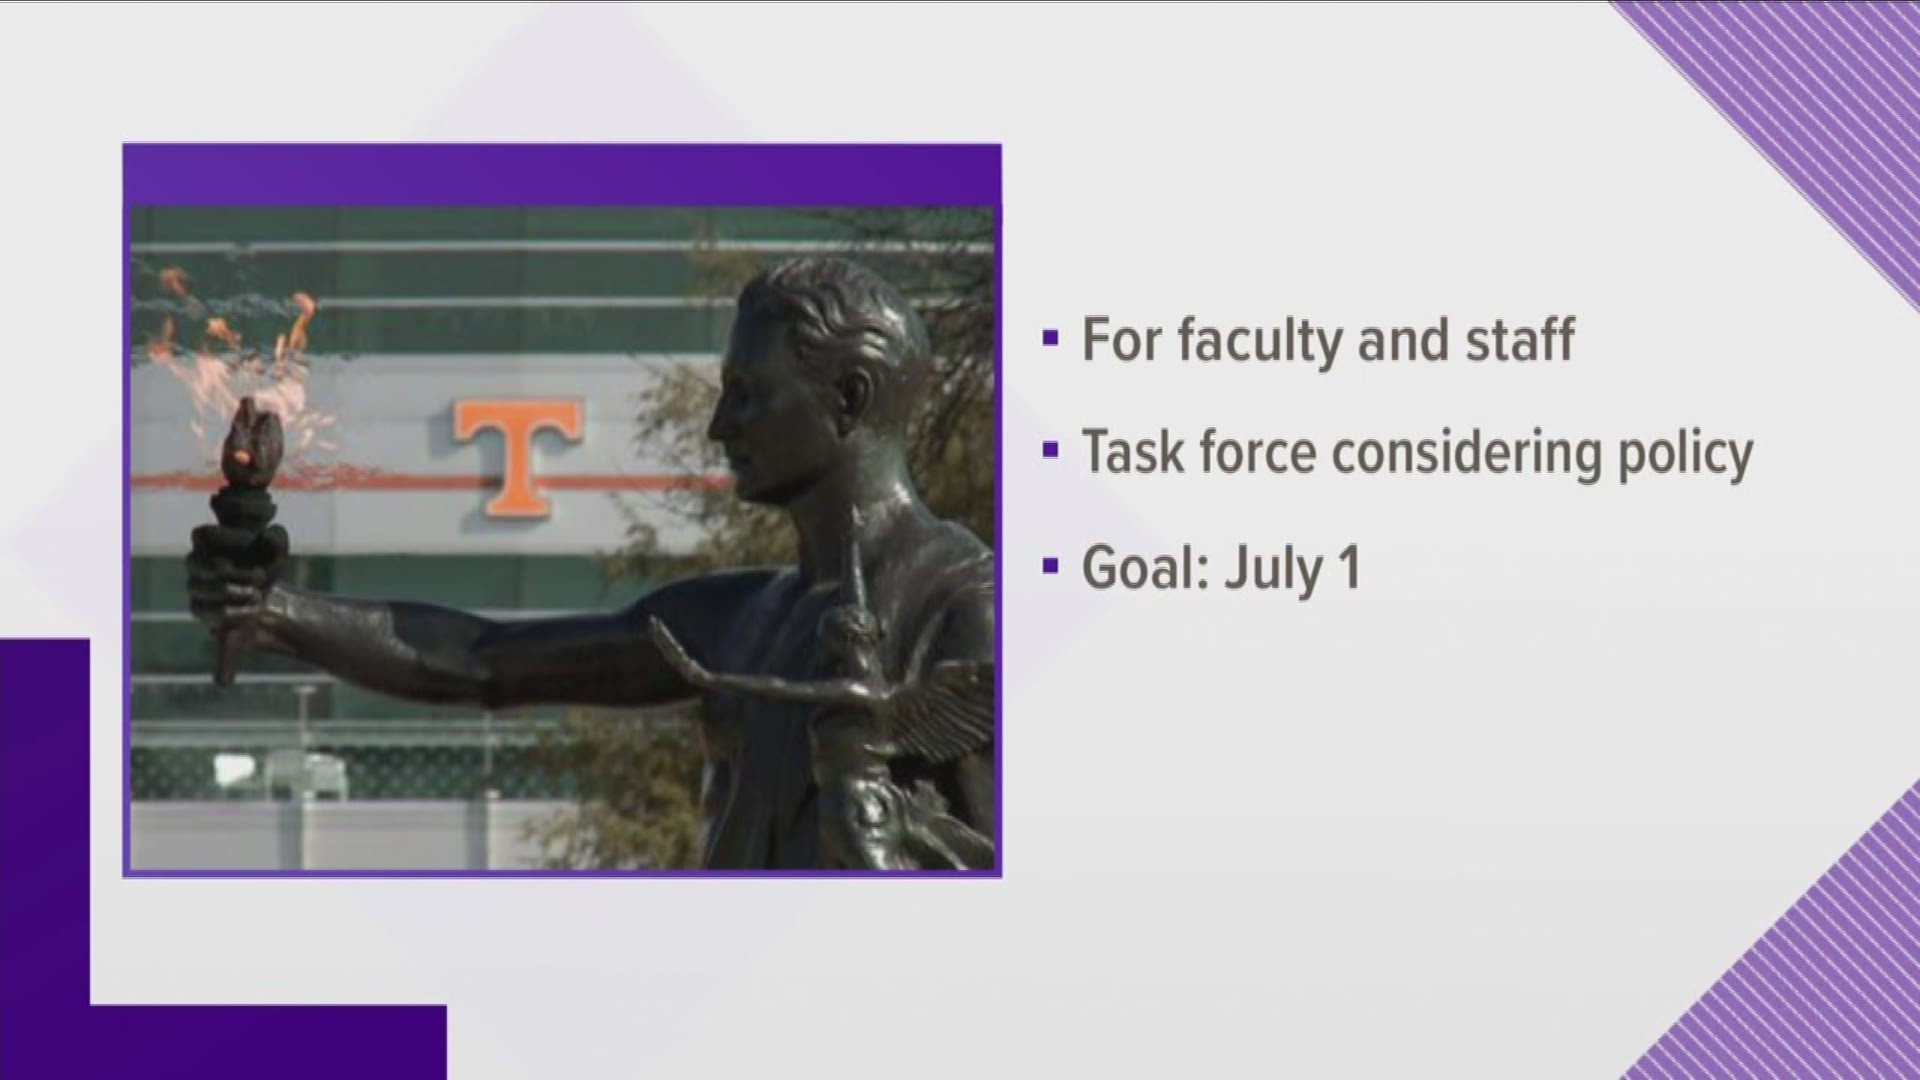 The University of Tennessee is considering a policy that would provide 12 weeks of paid family leave for faculty and staff.